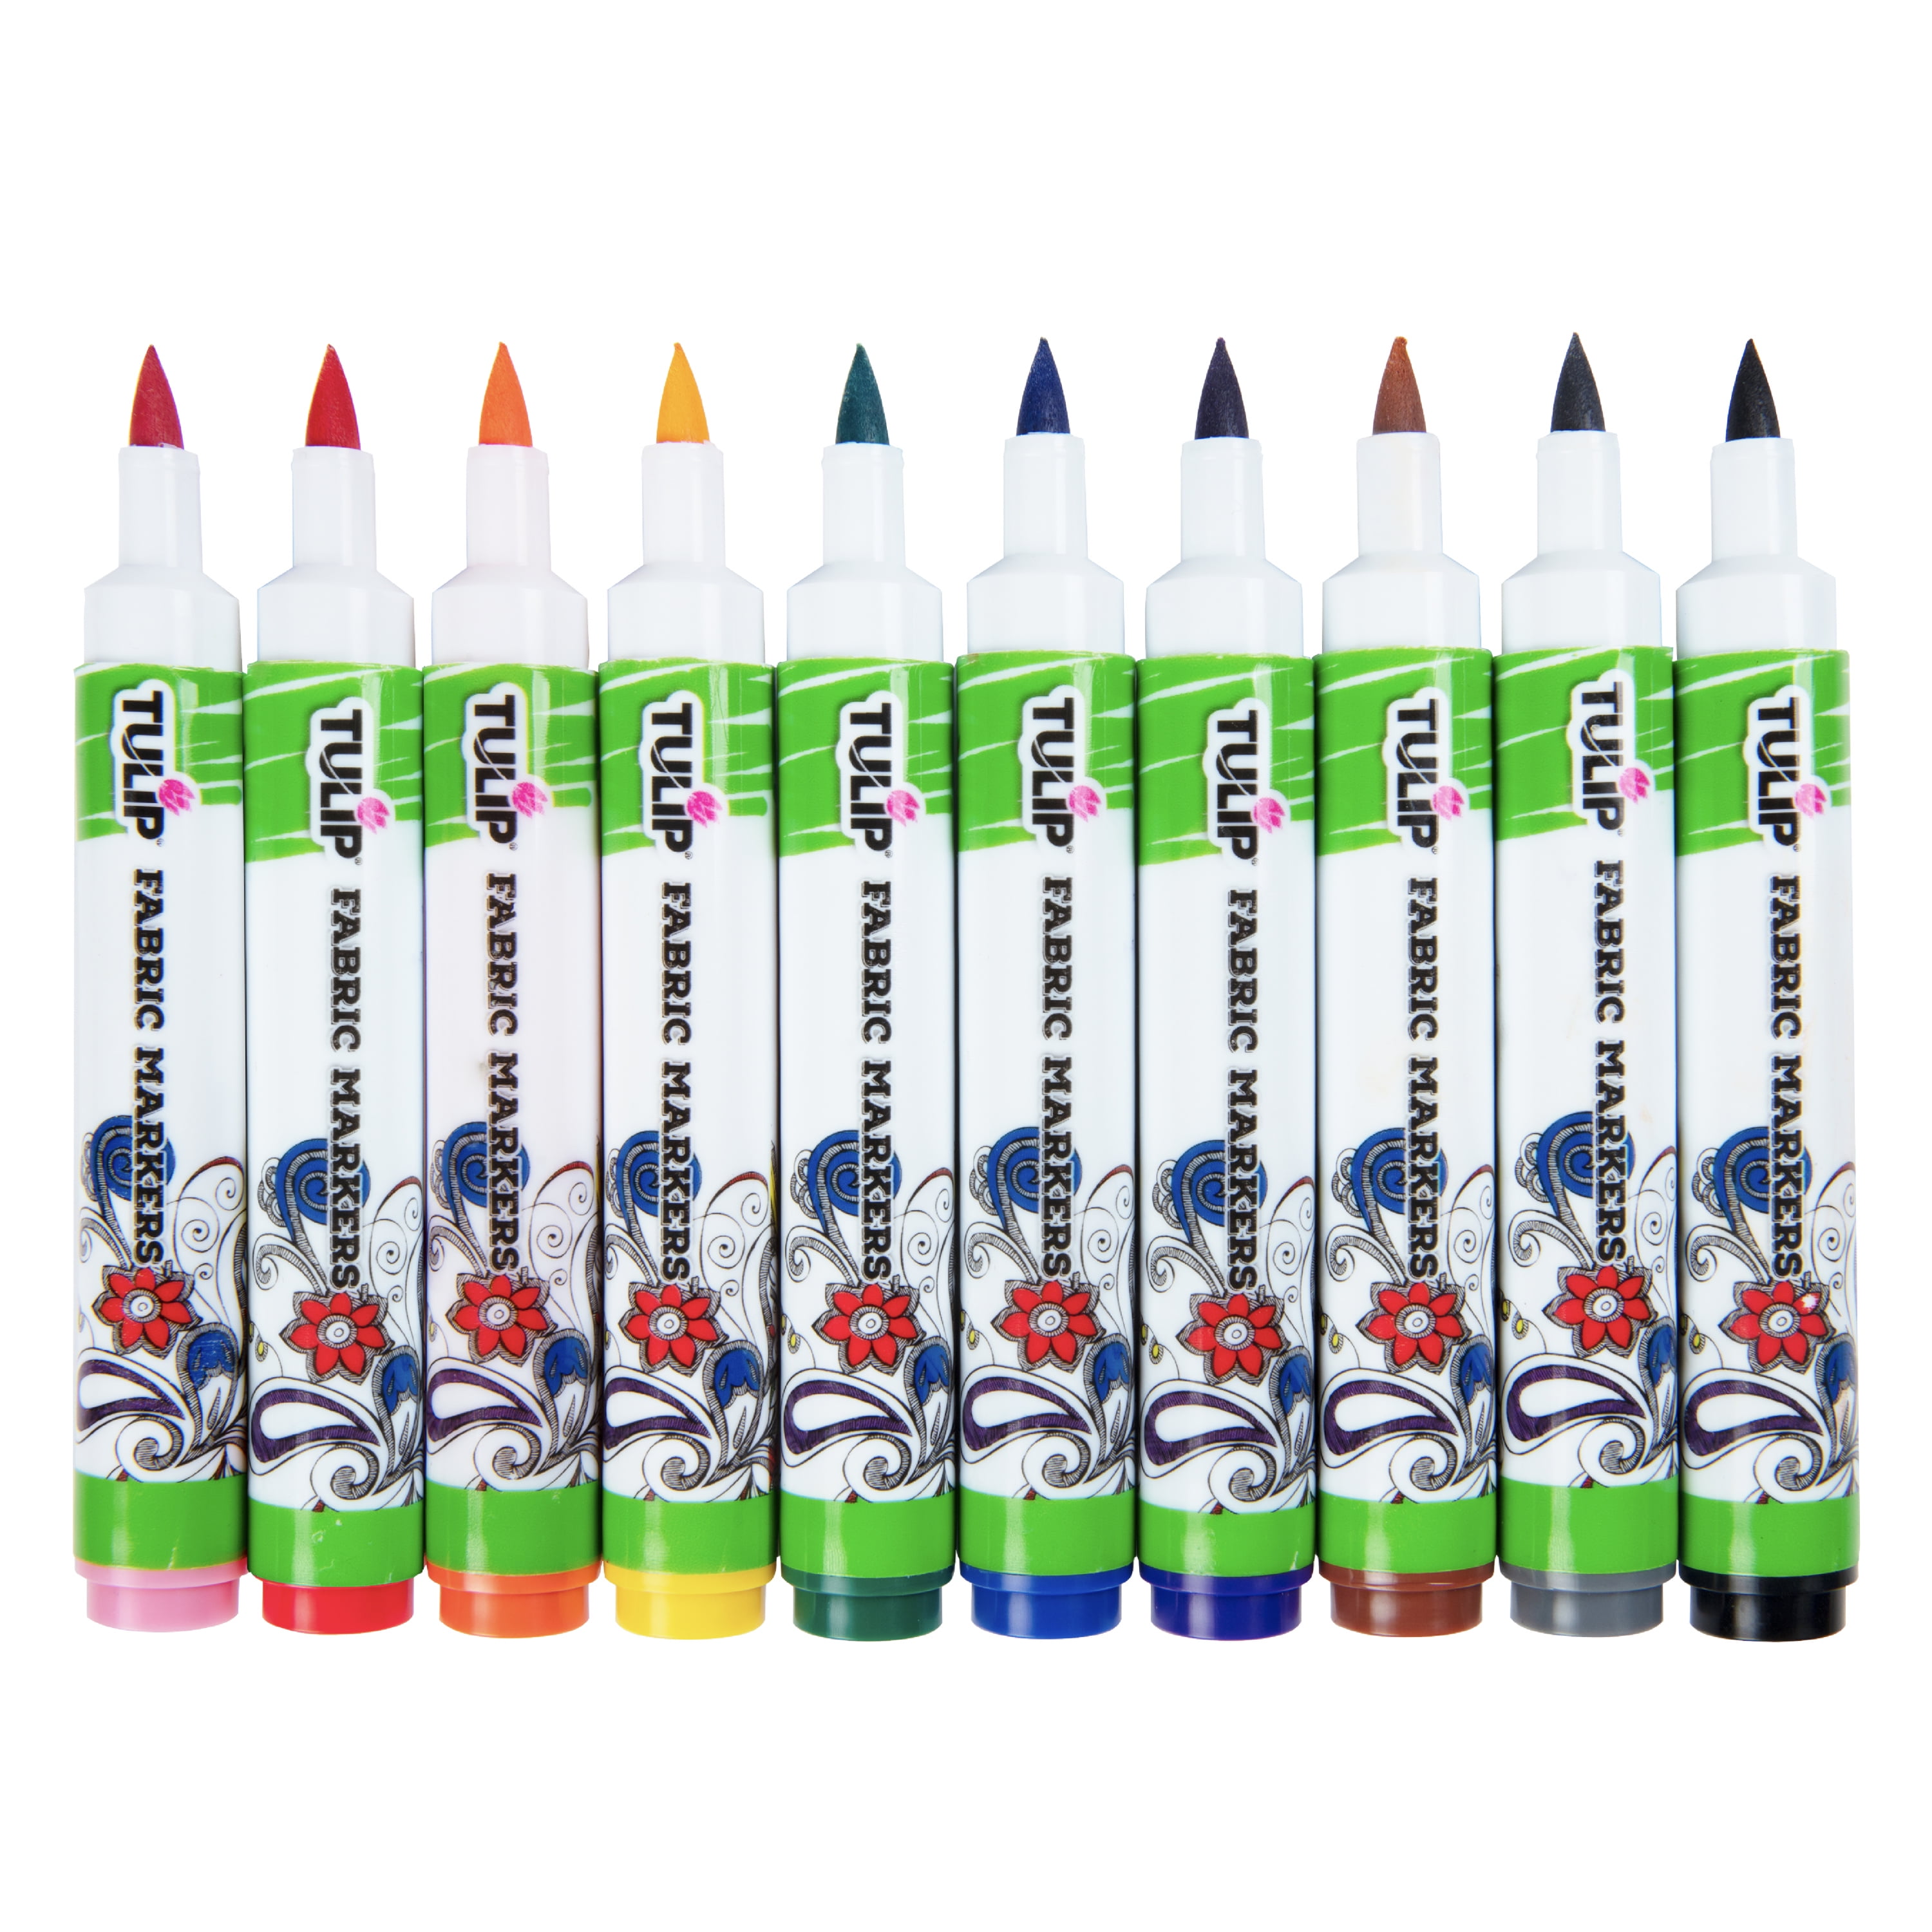 Tulip Electric Neon Fabric Markers 5 Pack – Tulip Color Crafts